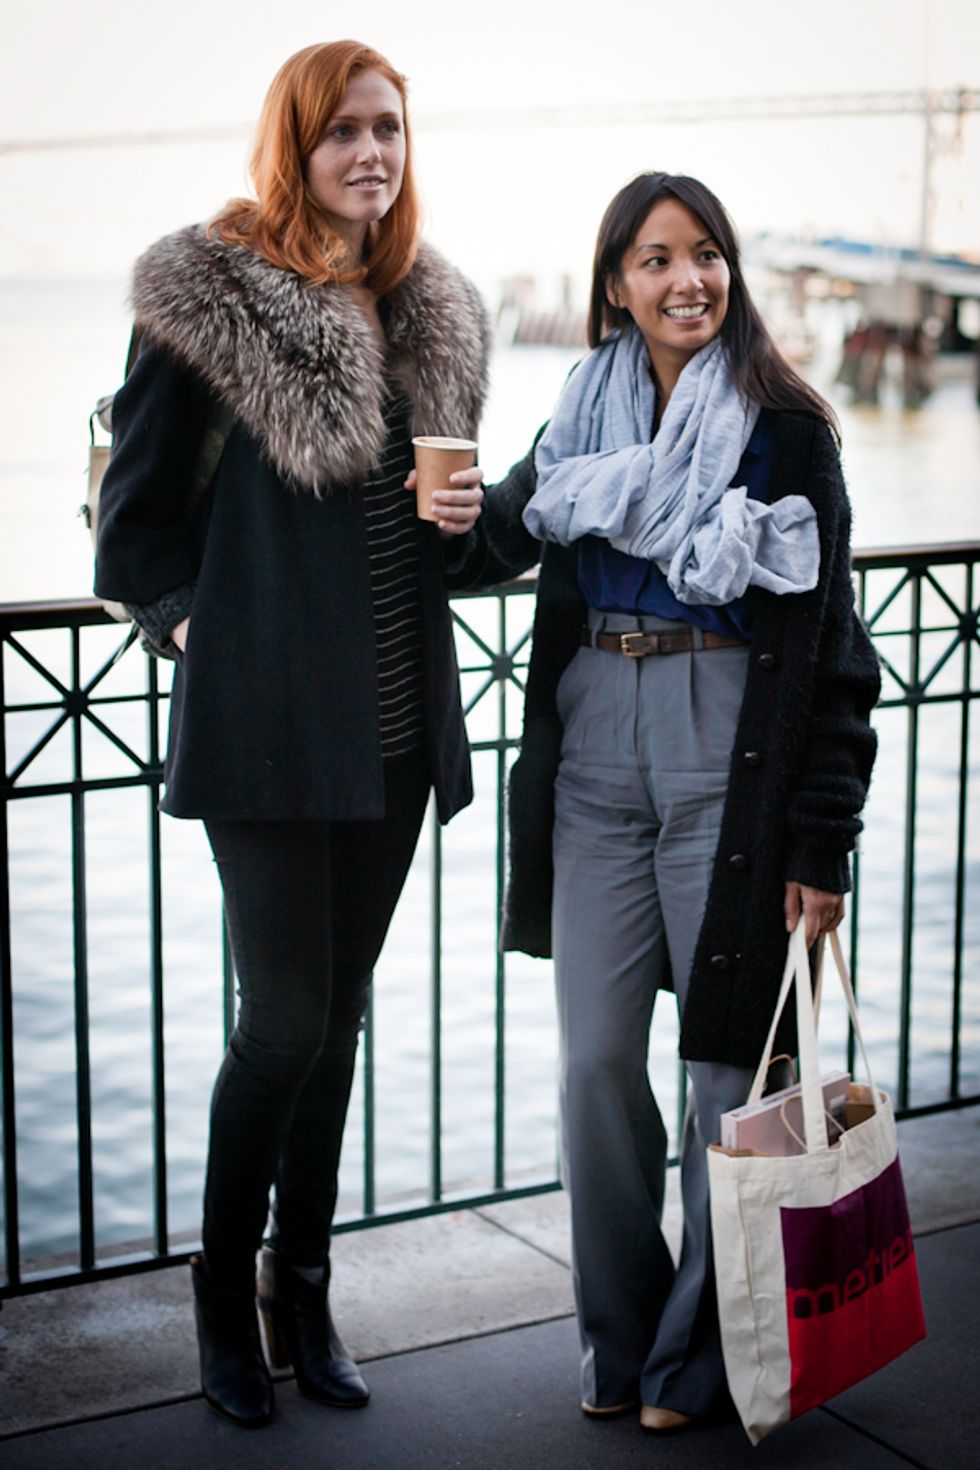 SF Street Style: A Local Model and Designer at the Ferry Building